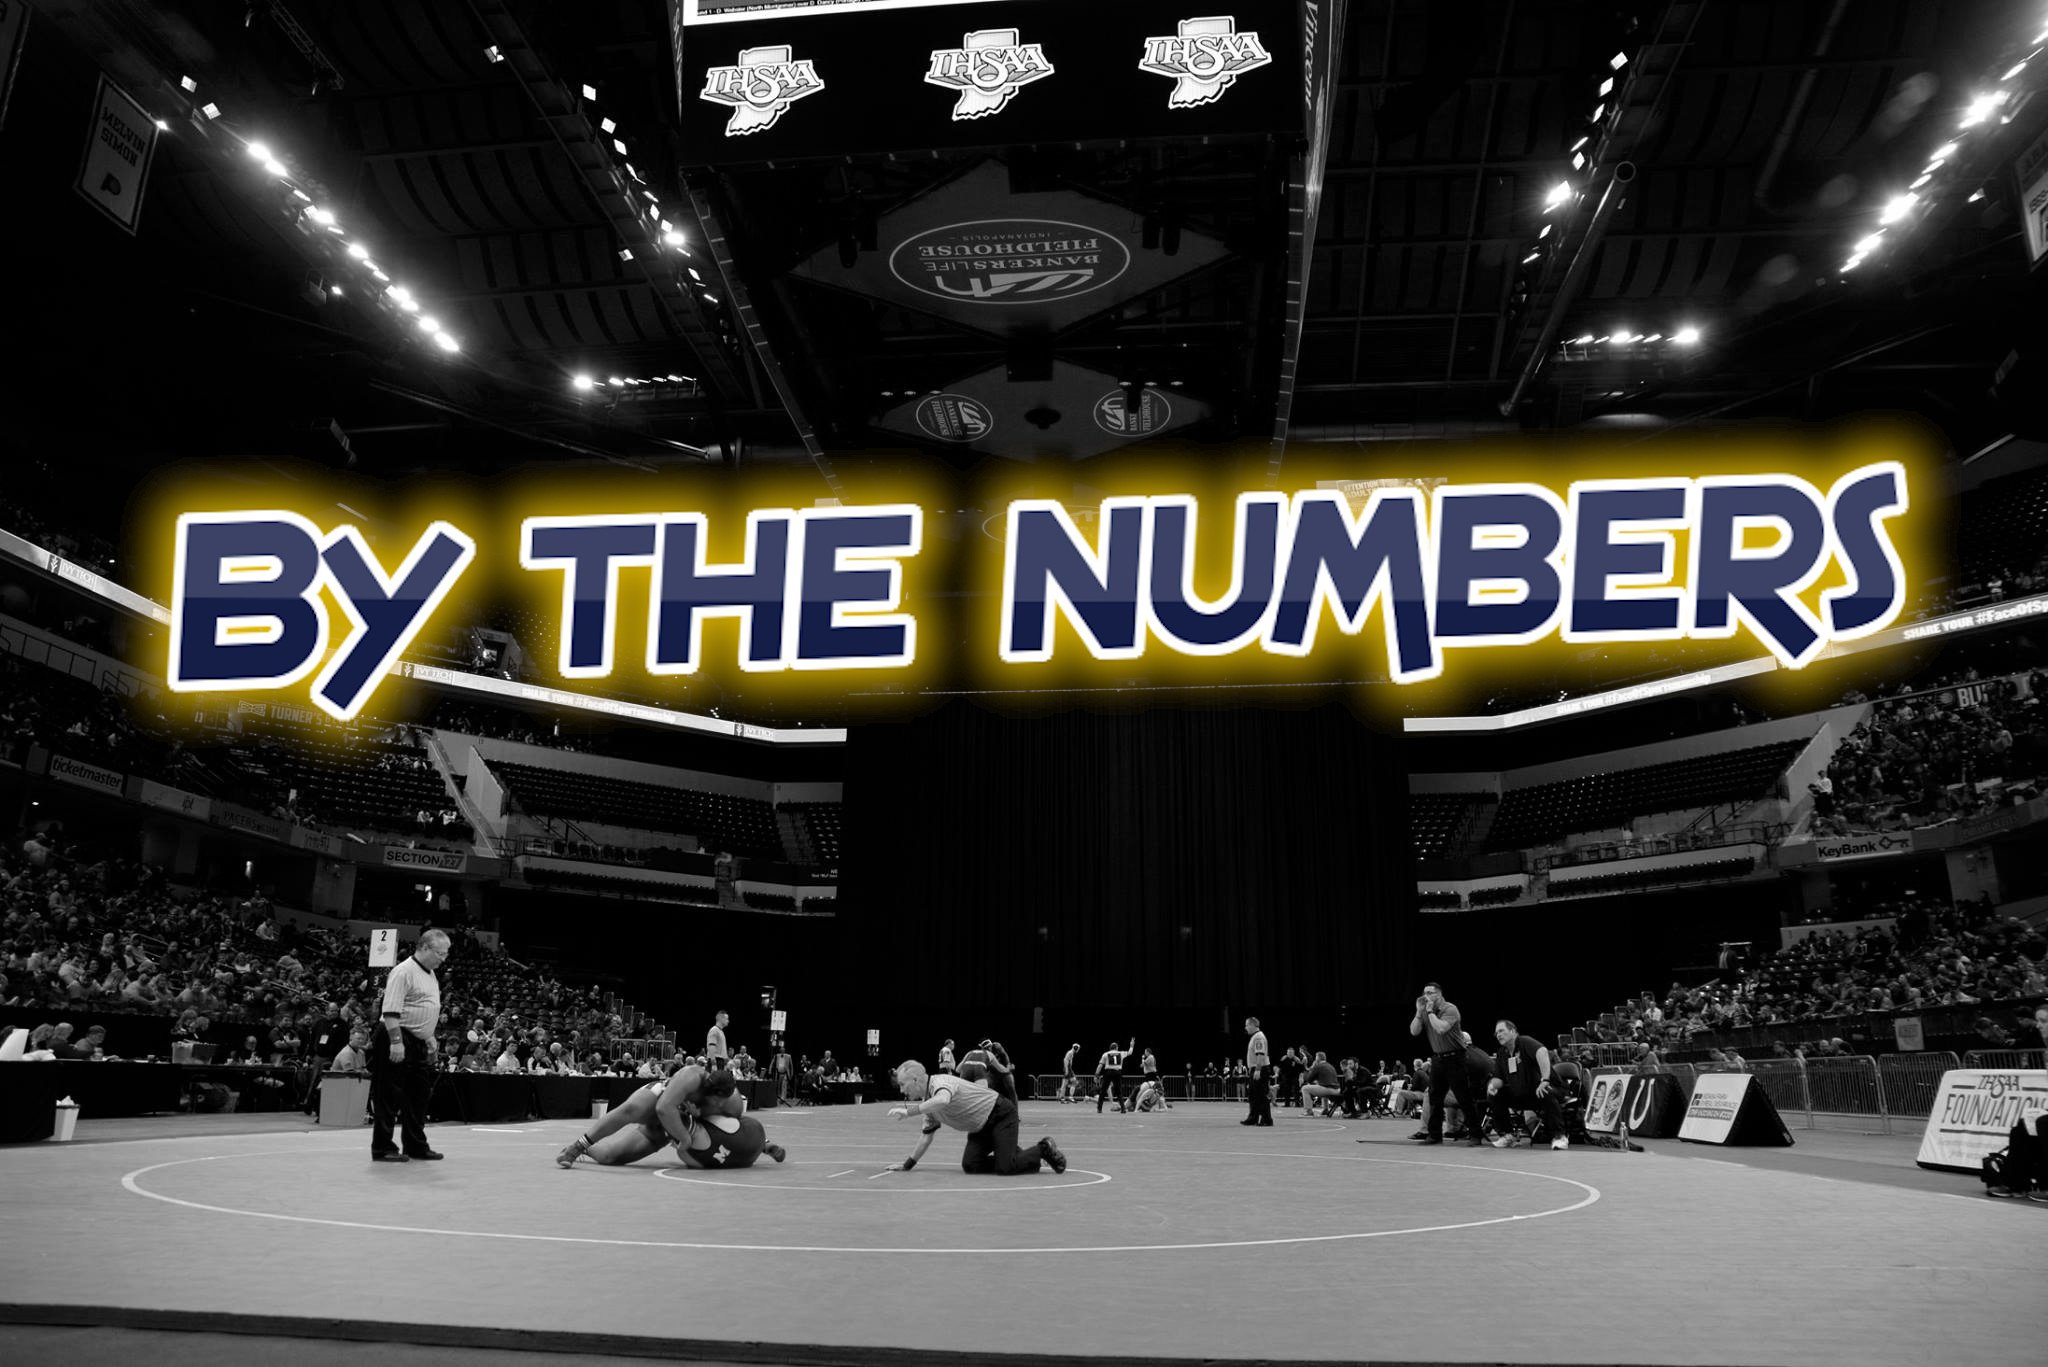 More information about "2021 State Finals by the Numbers"